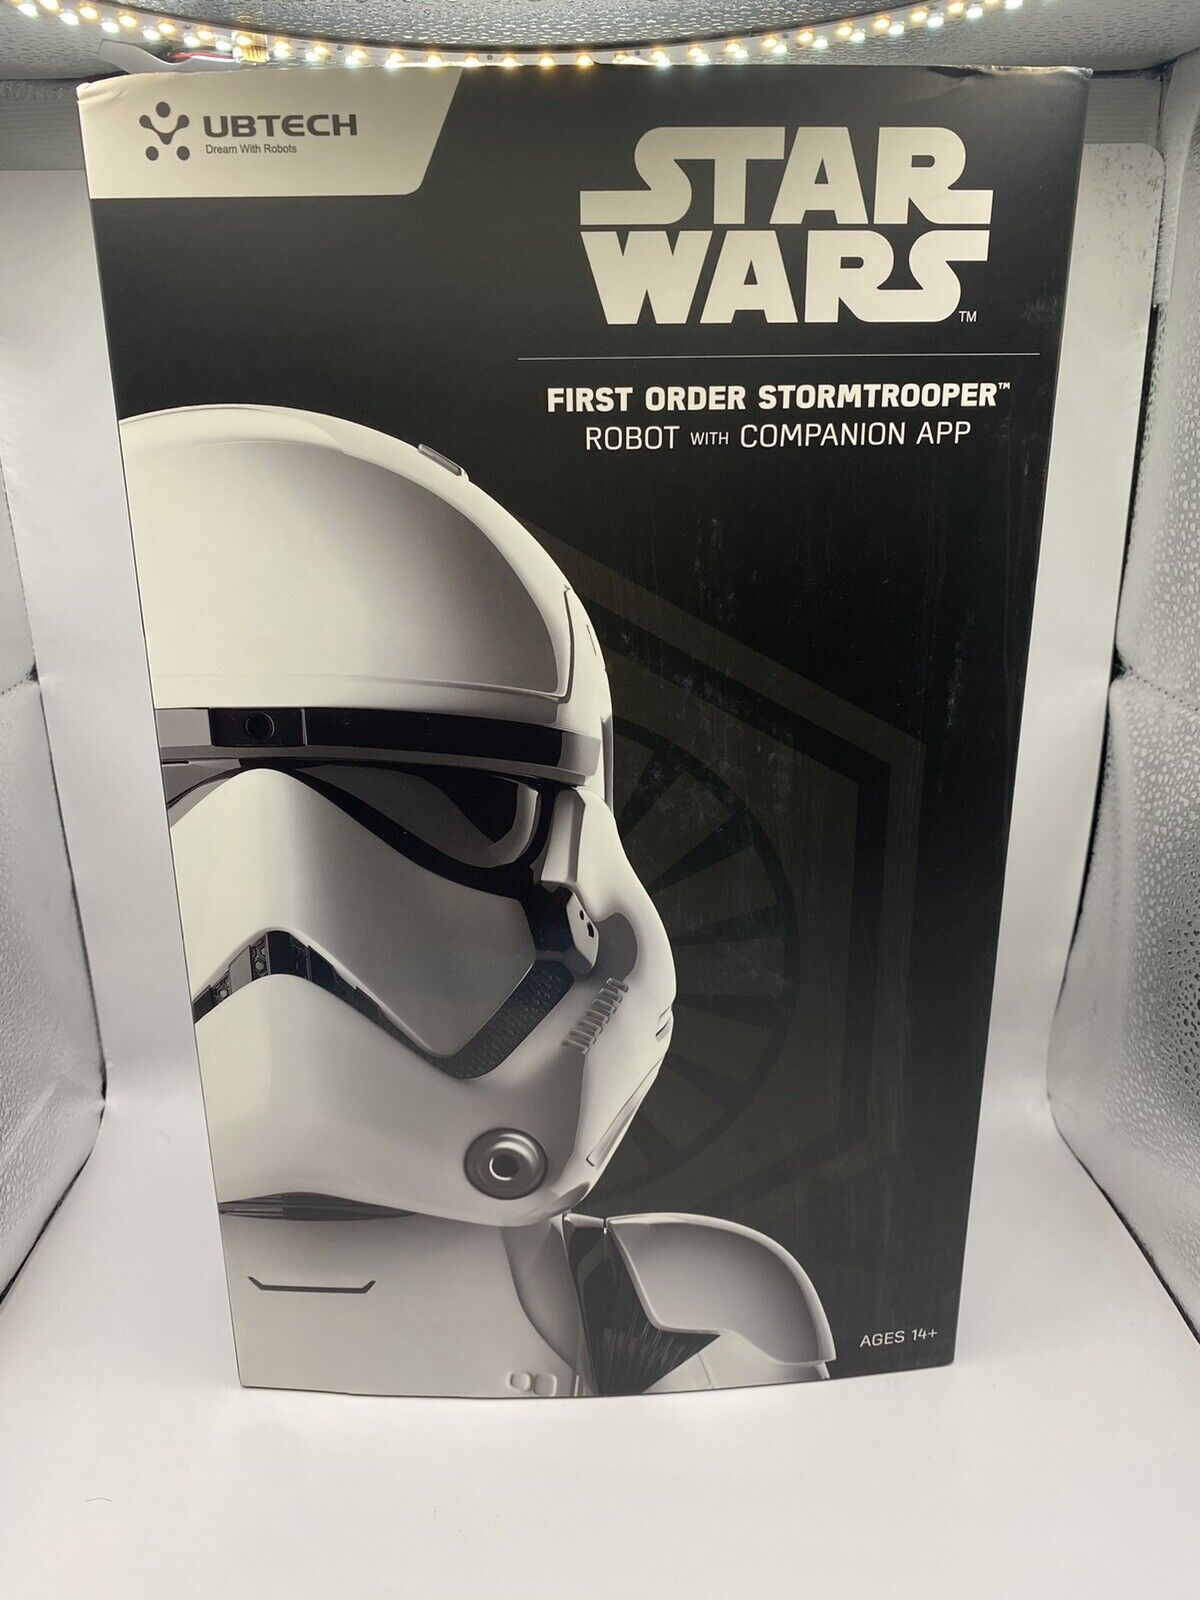 Star Wars First Order Stormtrooper Robot with Companion App by Ubtech